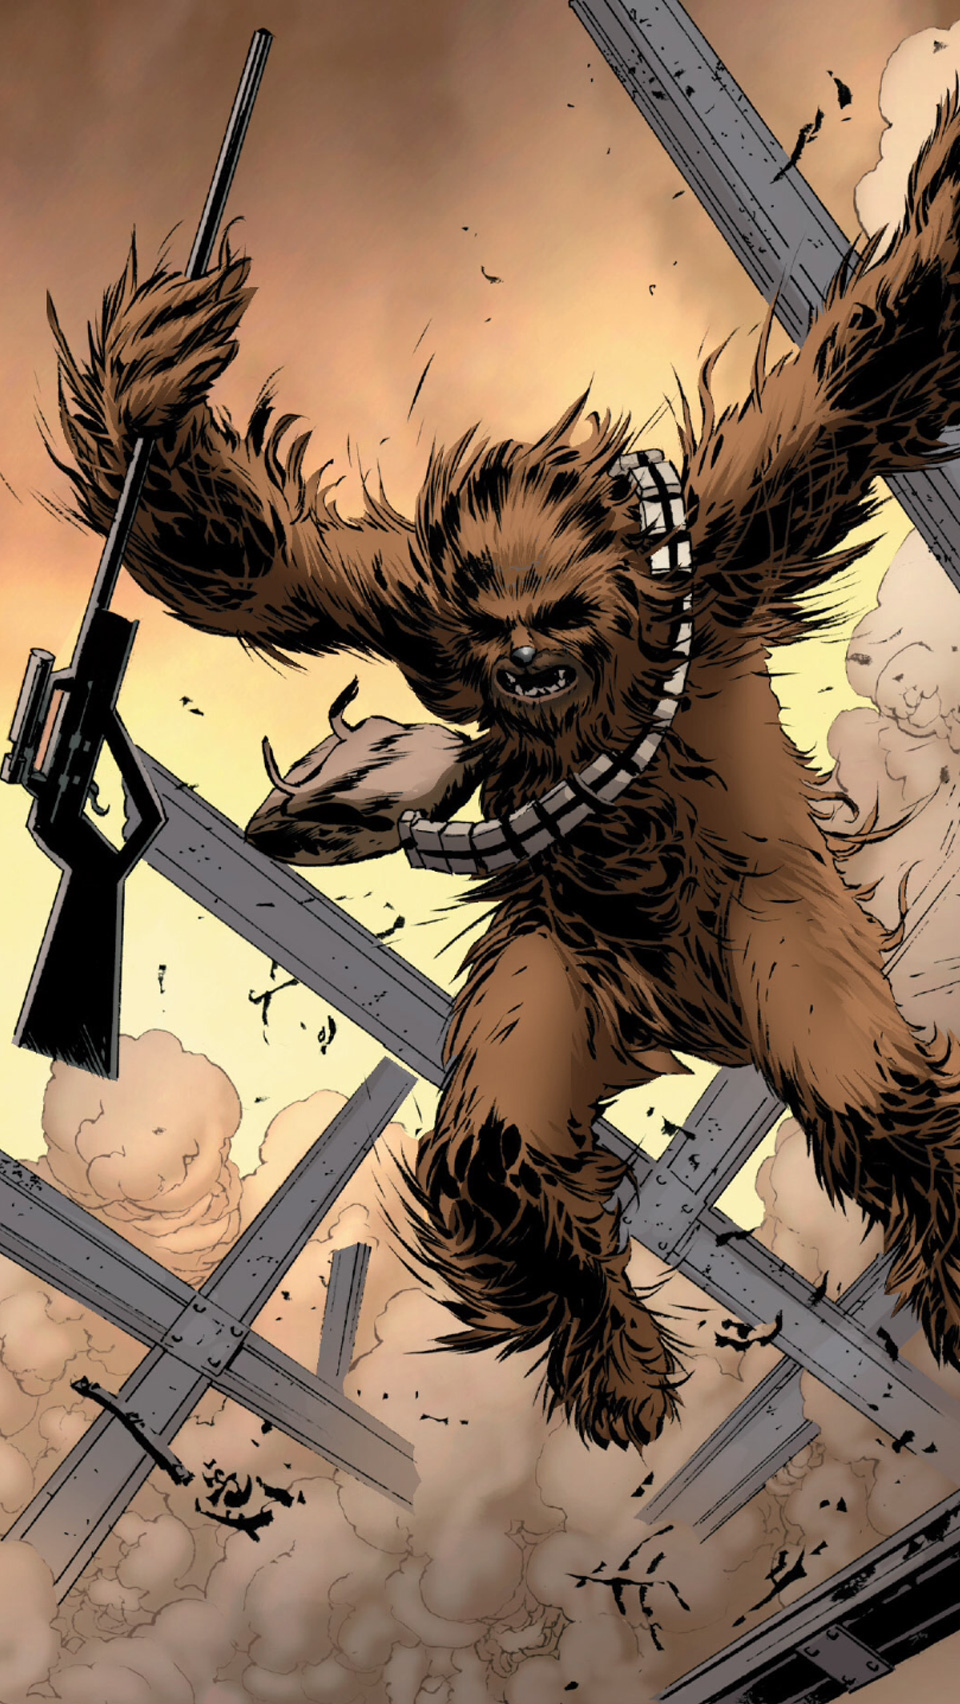 Have some Star Wars iOS Wallpapers courtesy of Marvel – Laser Time